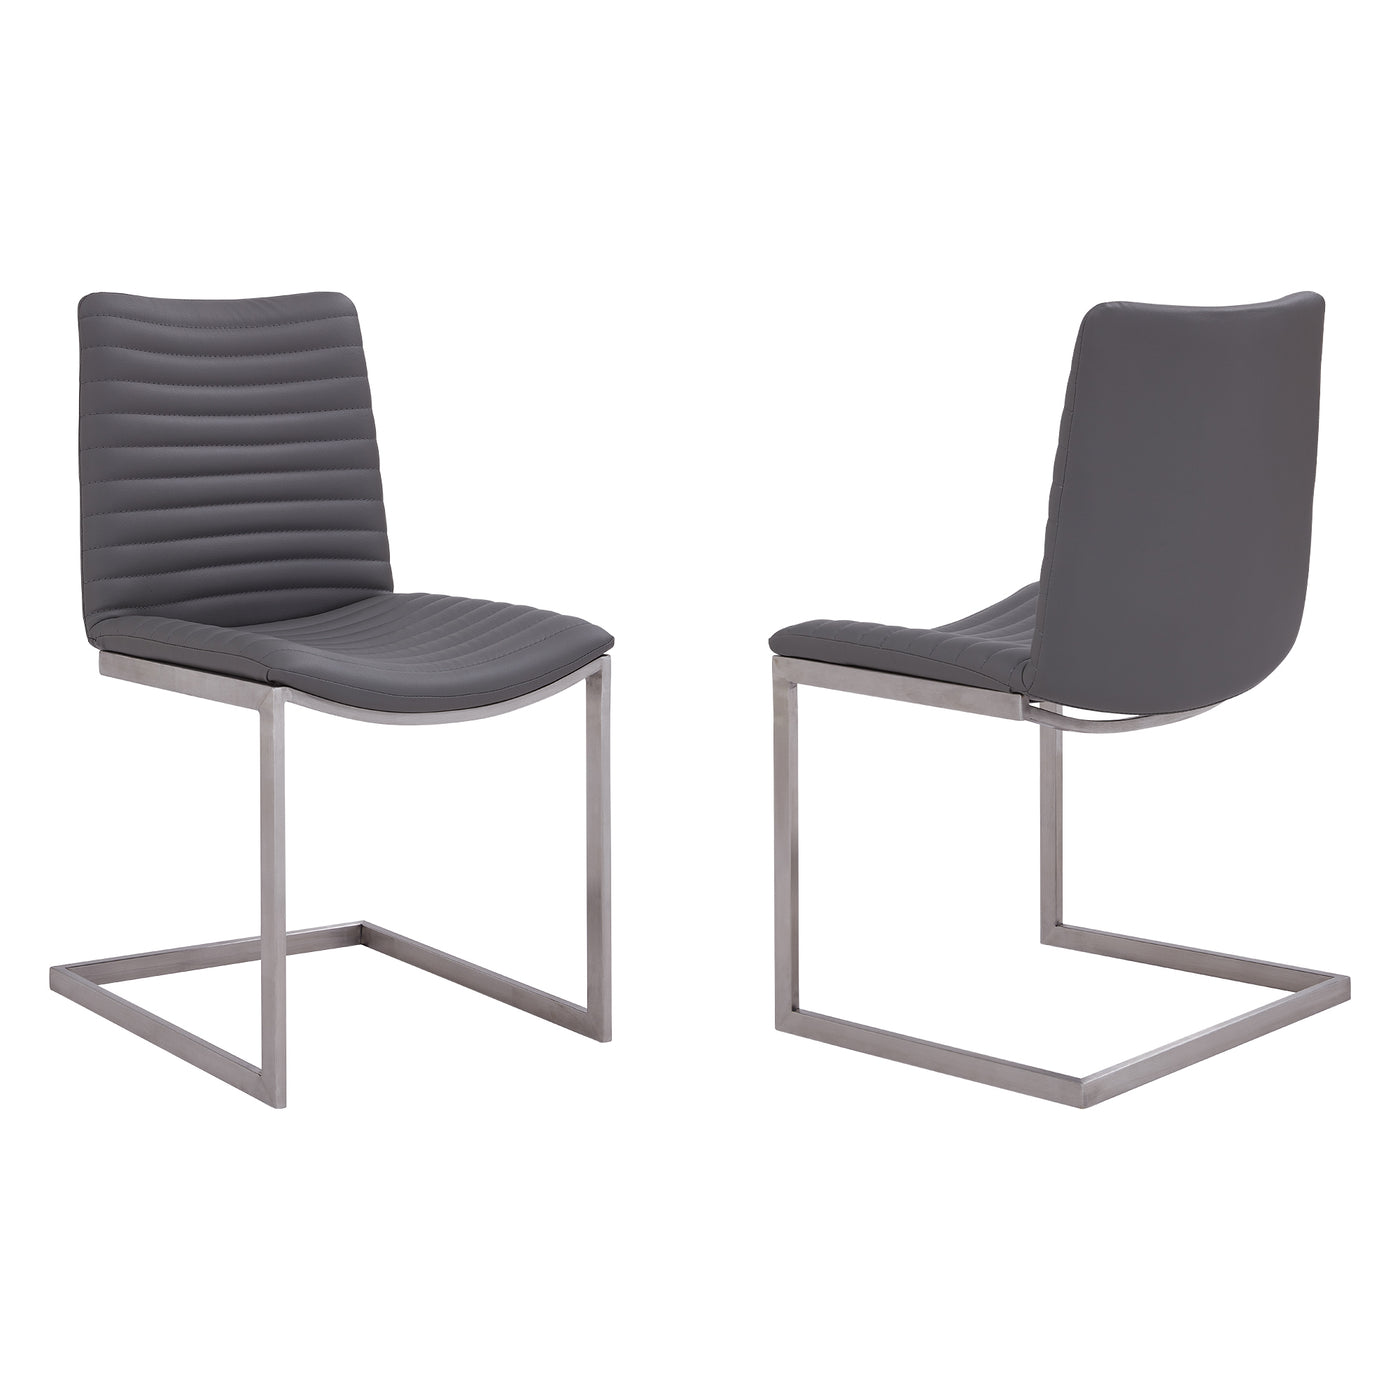 April Dining Chair Set of 2